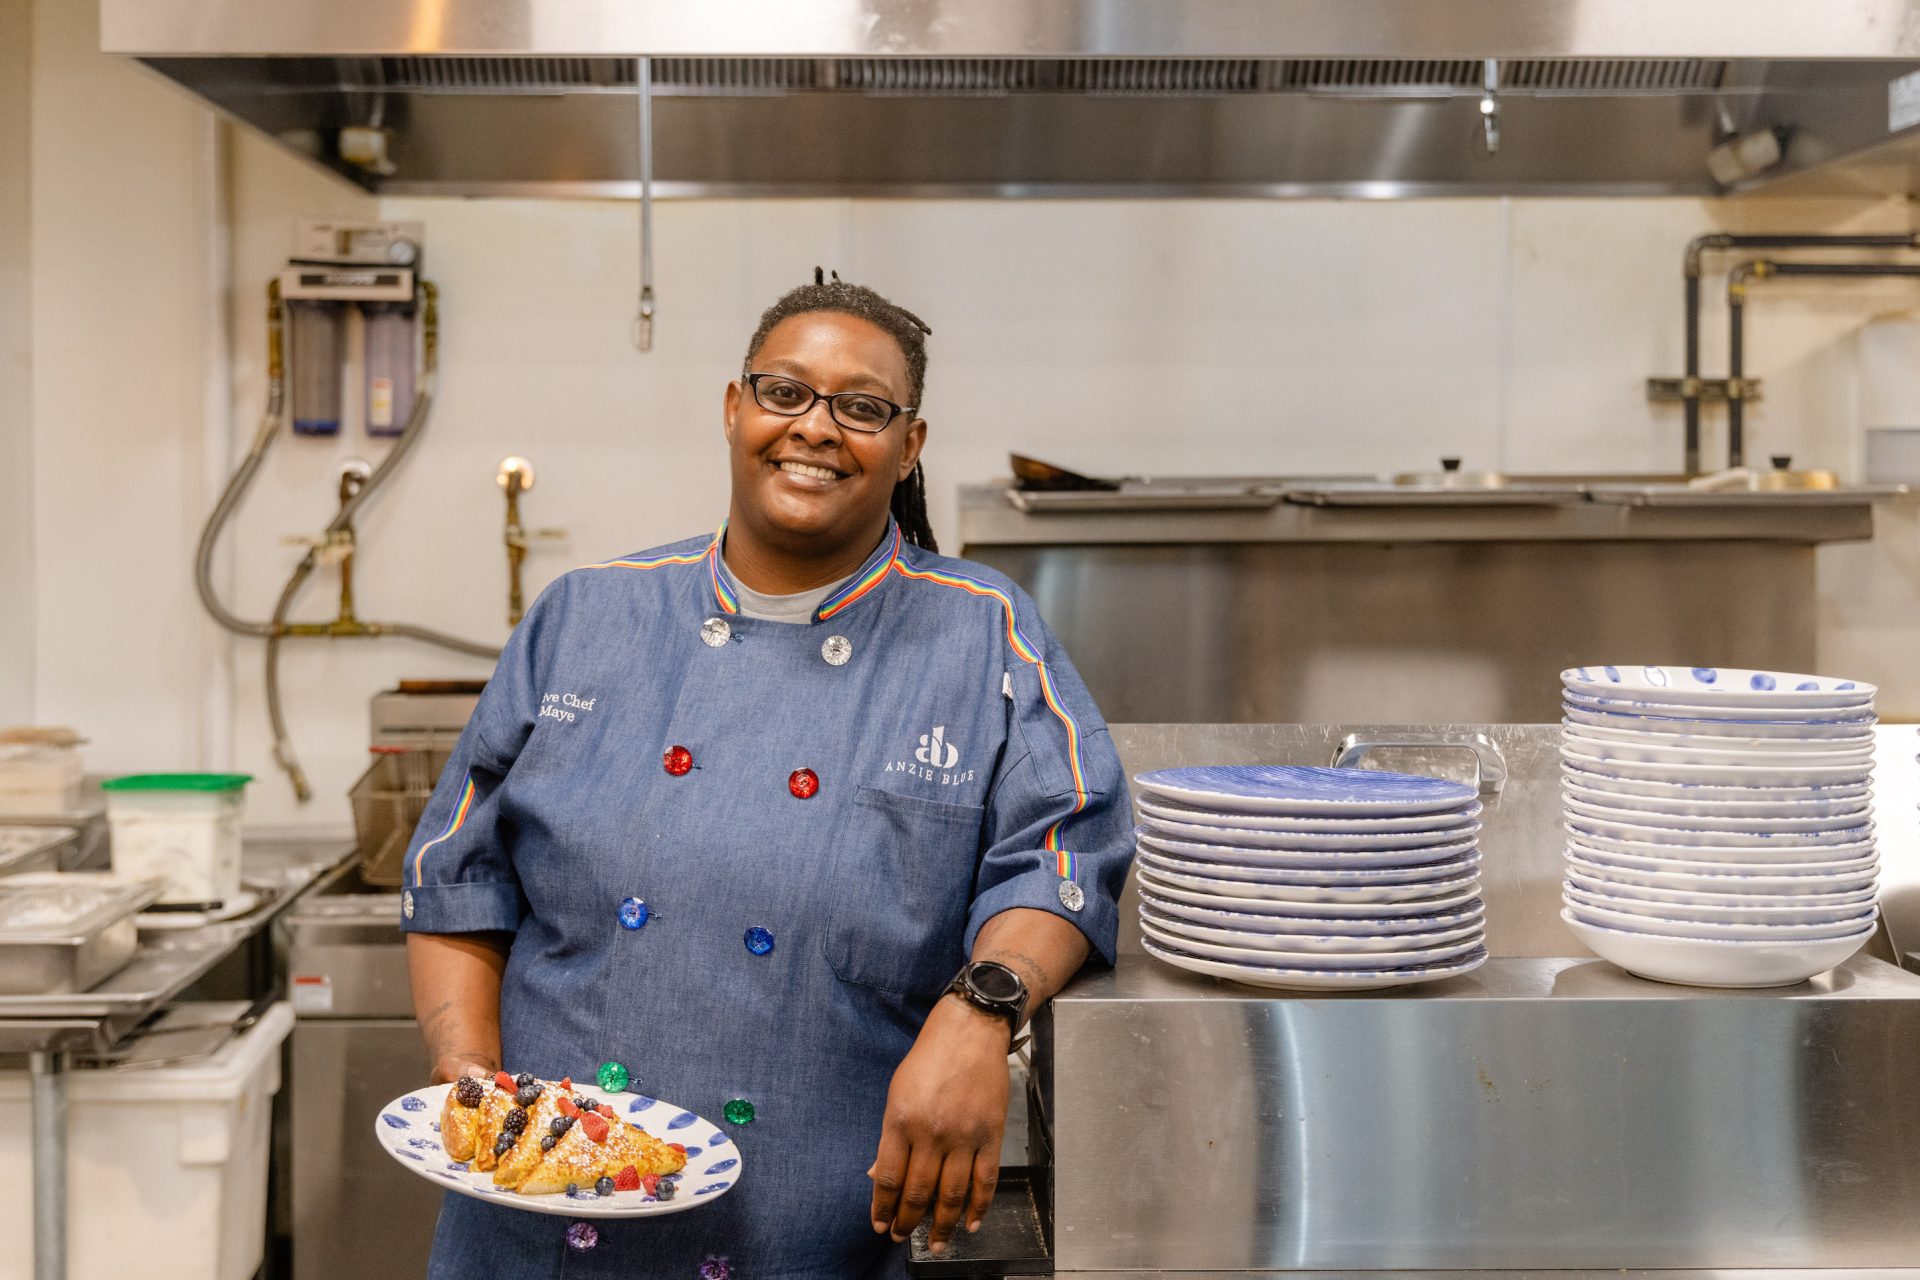 Southern Black female chef Star Maye holding a plate of french toast in an industrial kitchen